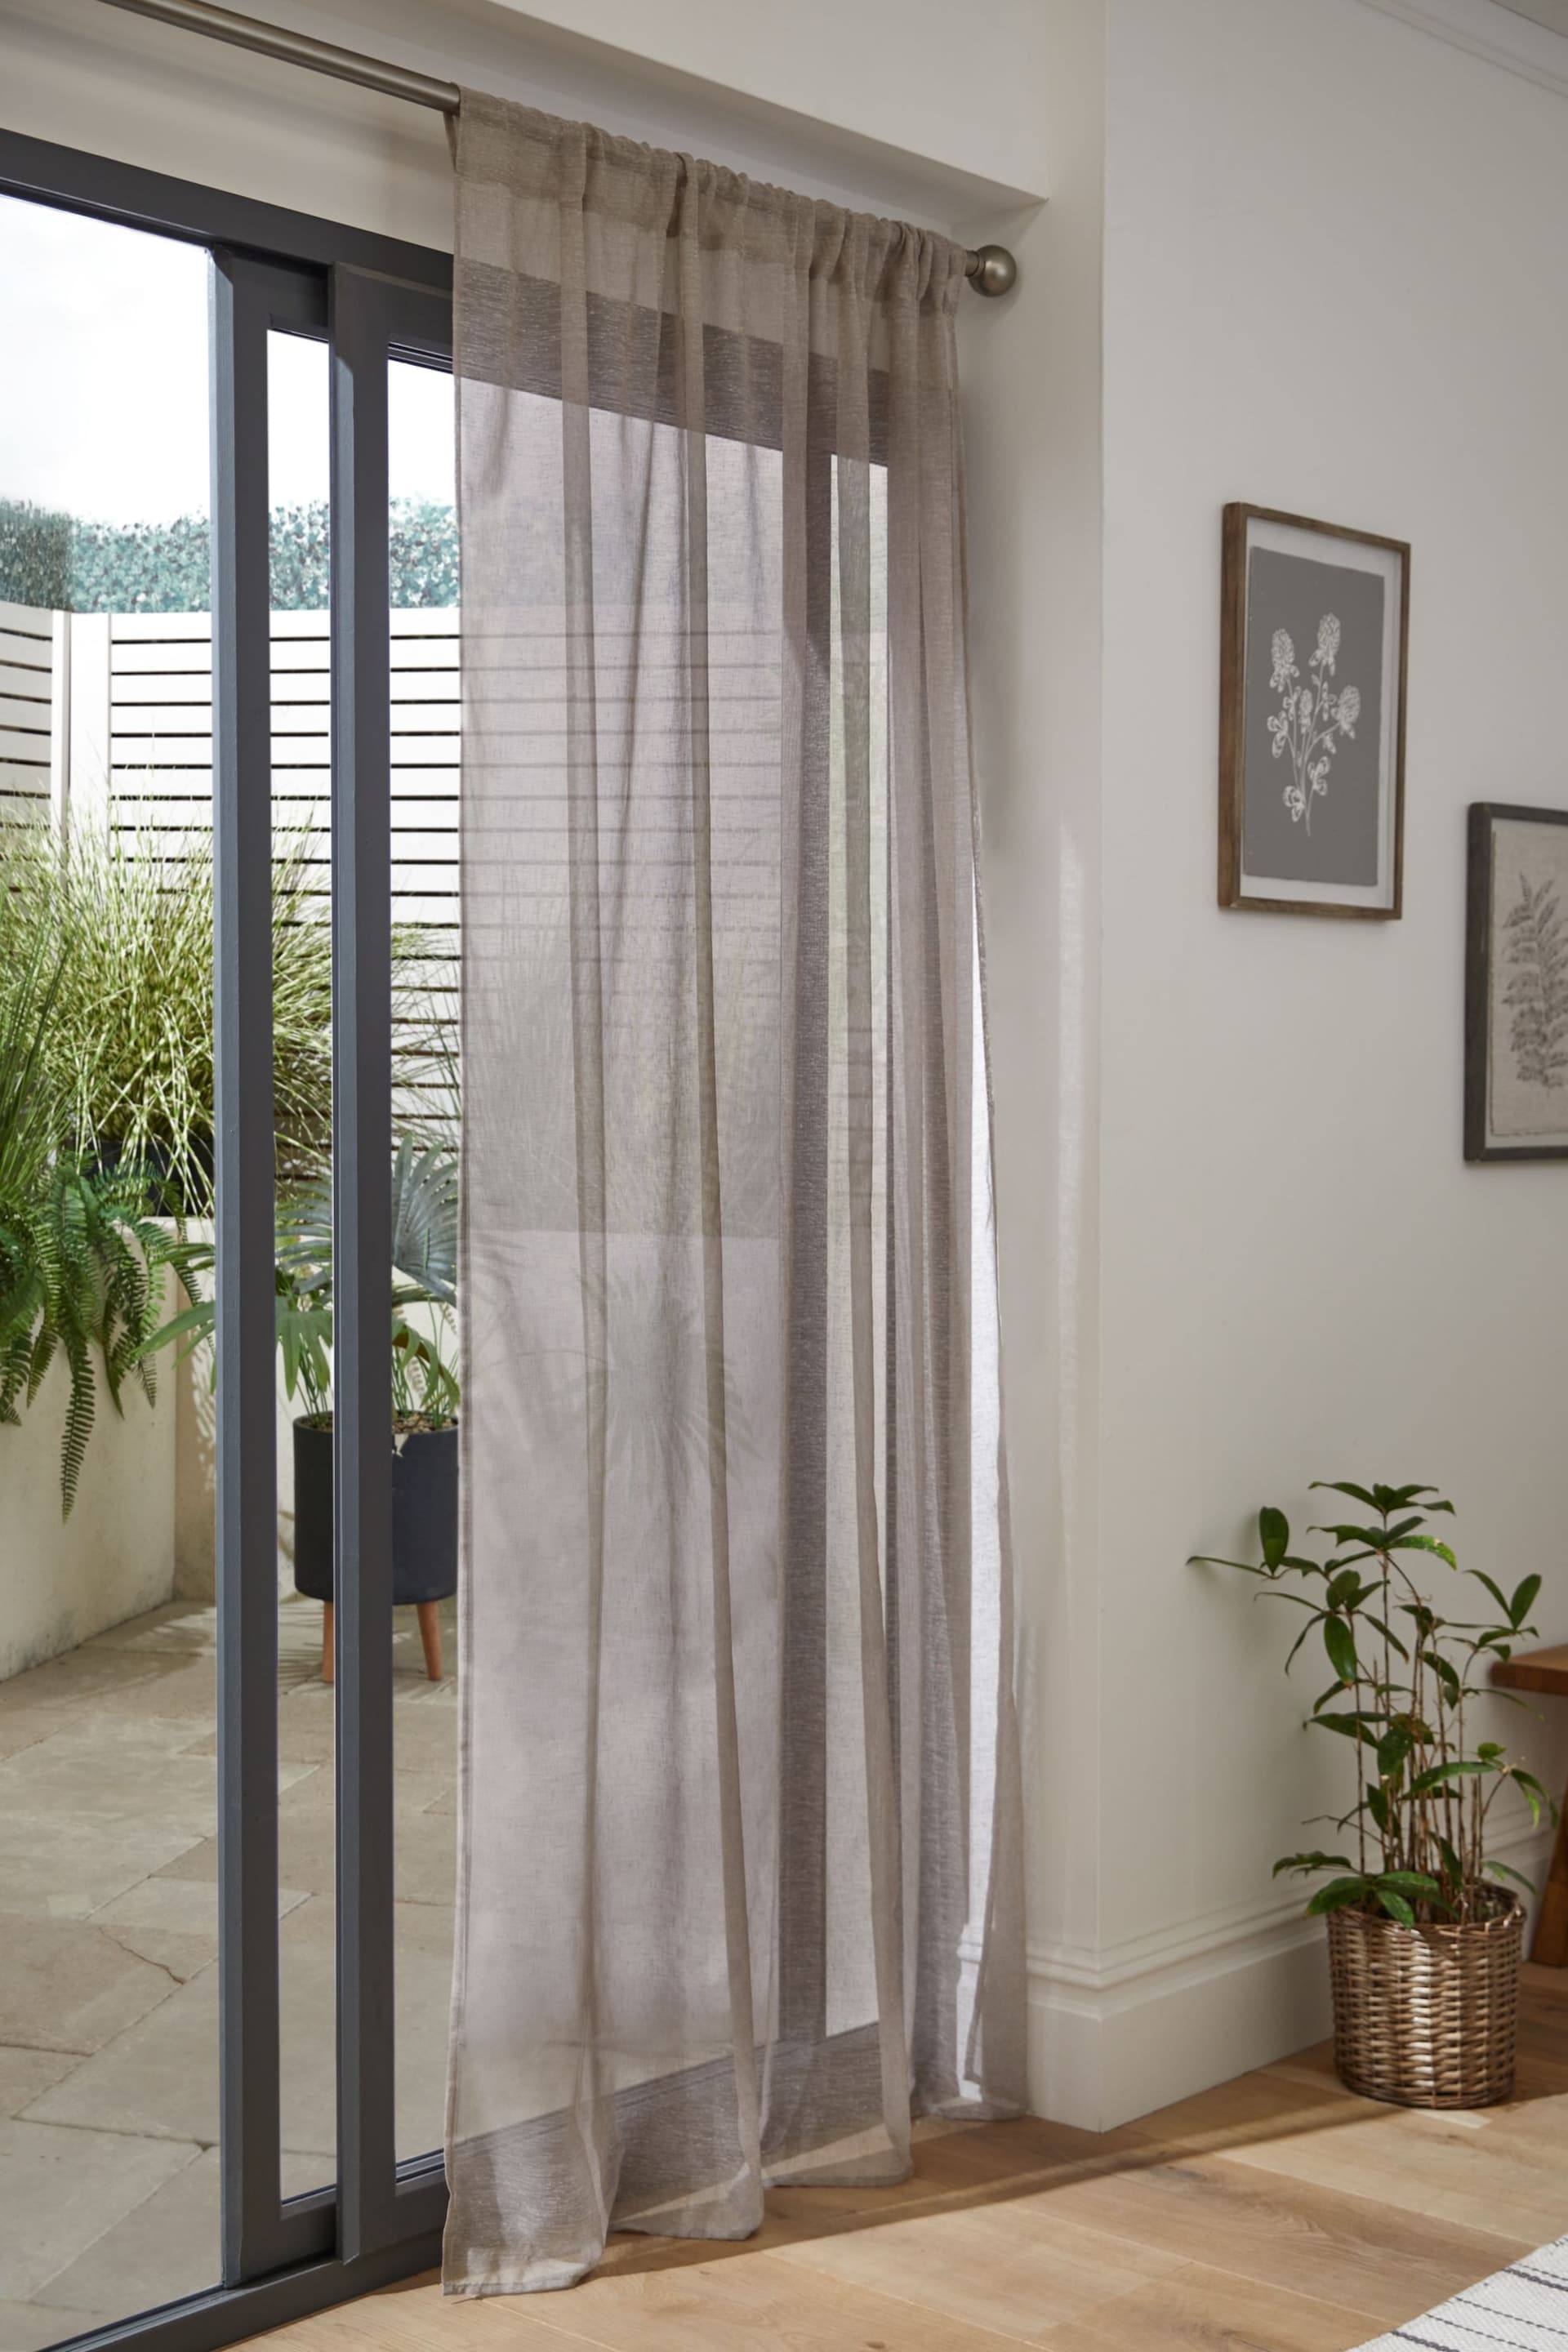 Natural Linen Look Voile Slot Top Sheer Panel Curtain - Image 1 of 4